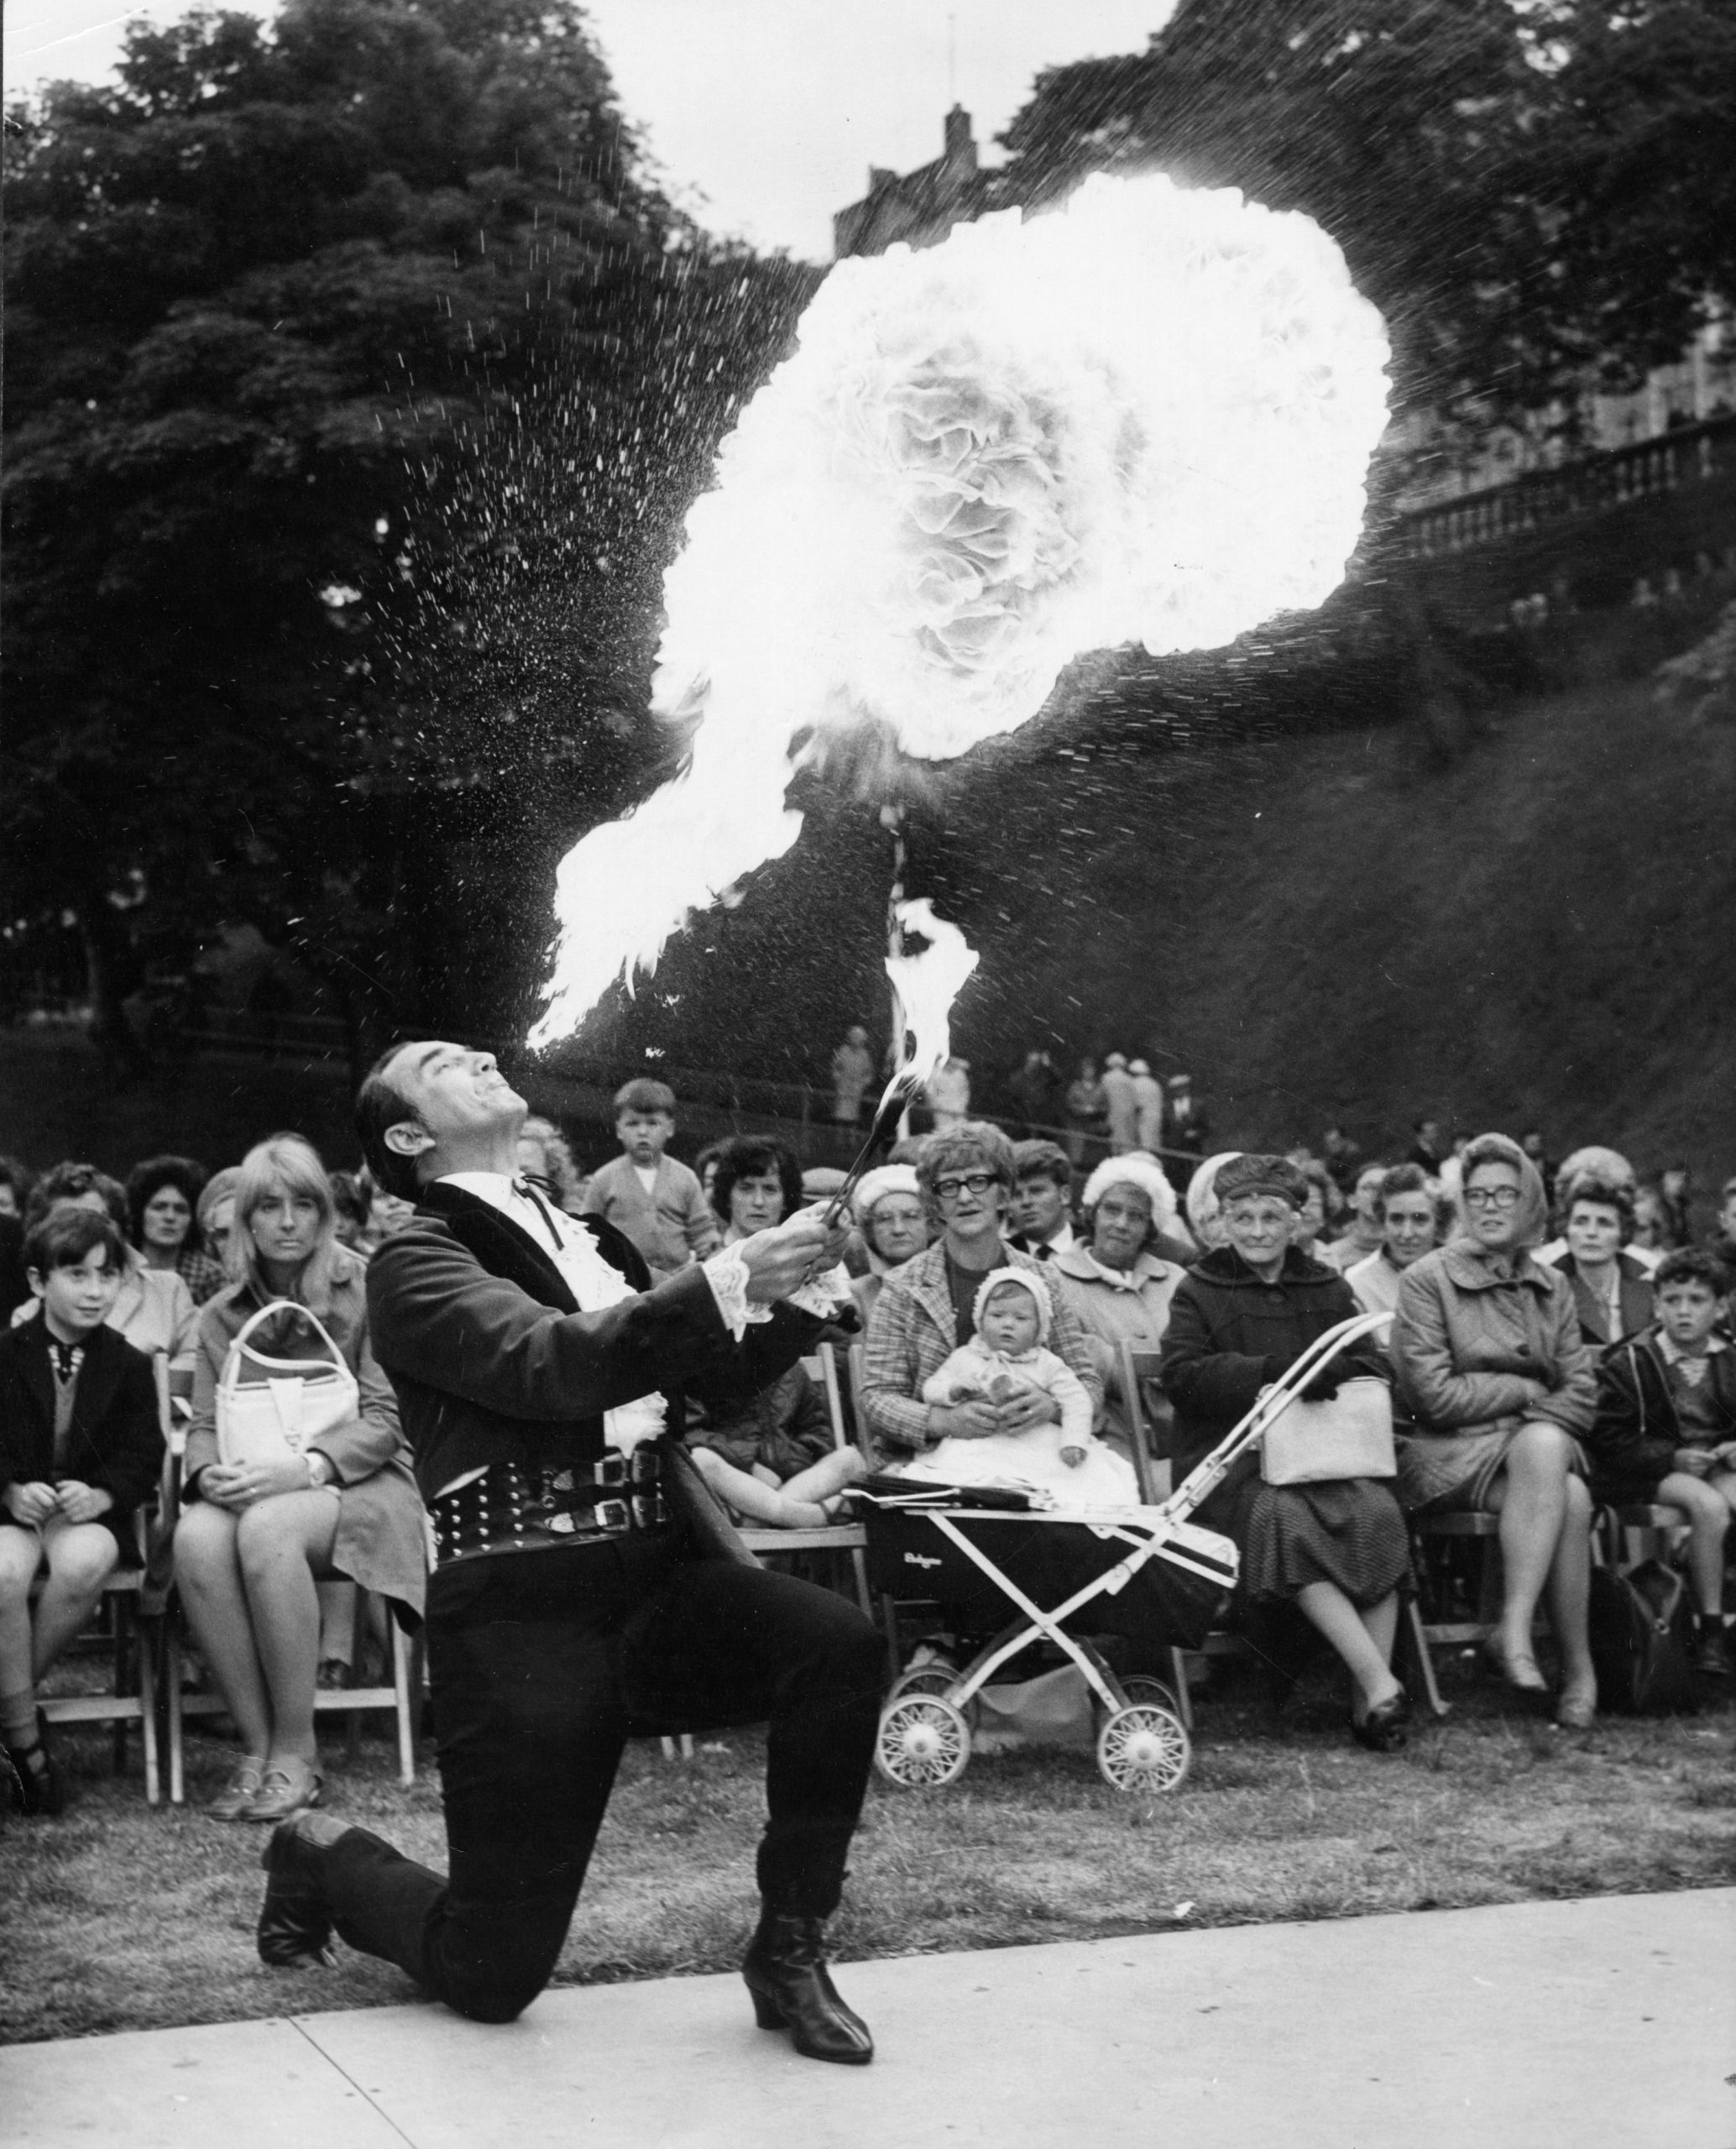 A fire-eater with a seated crowd watching.